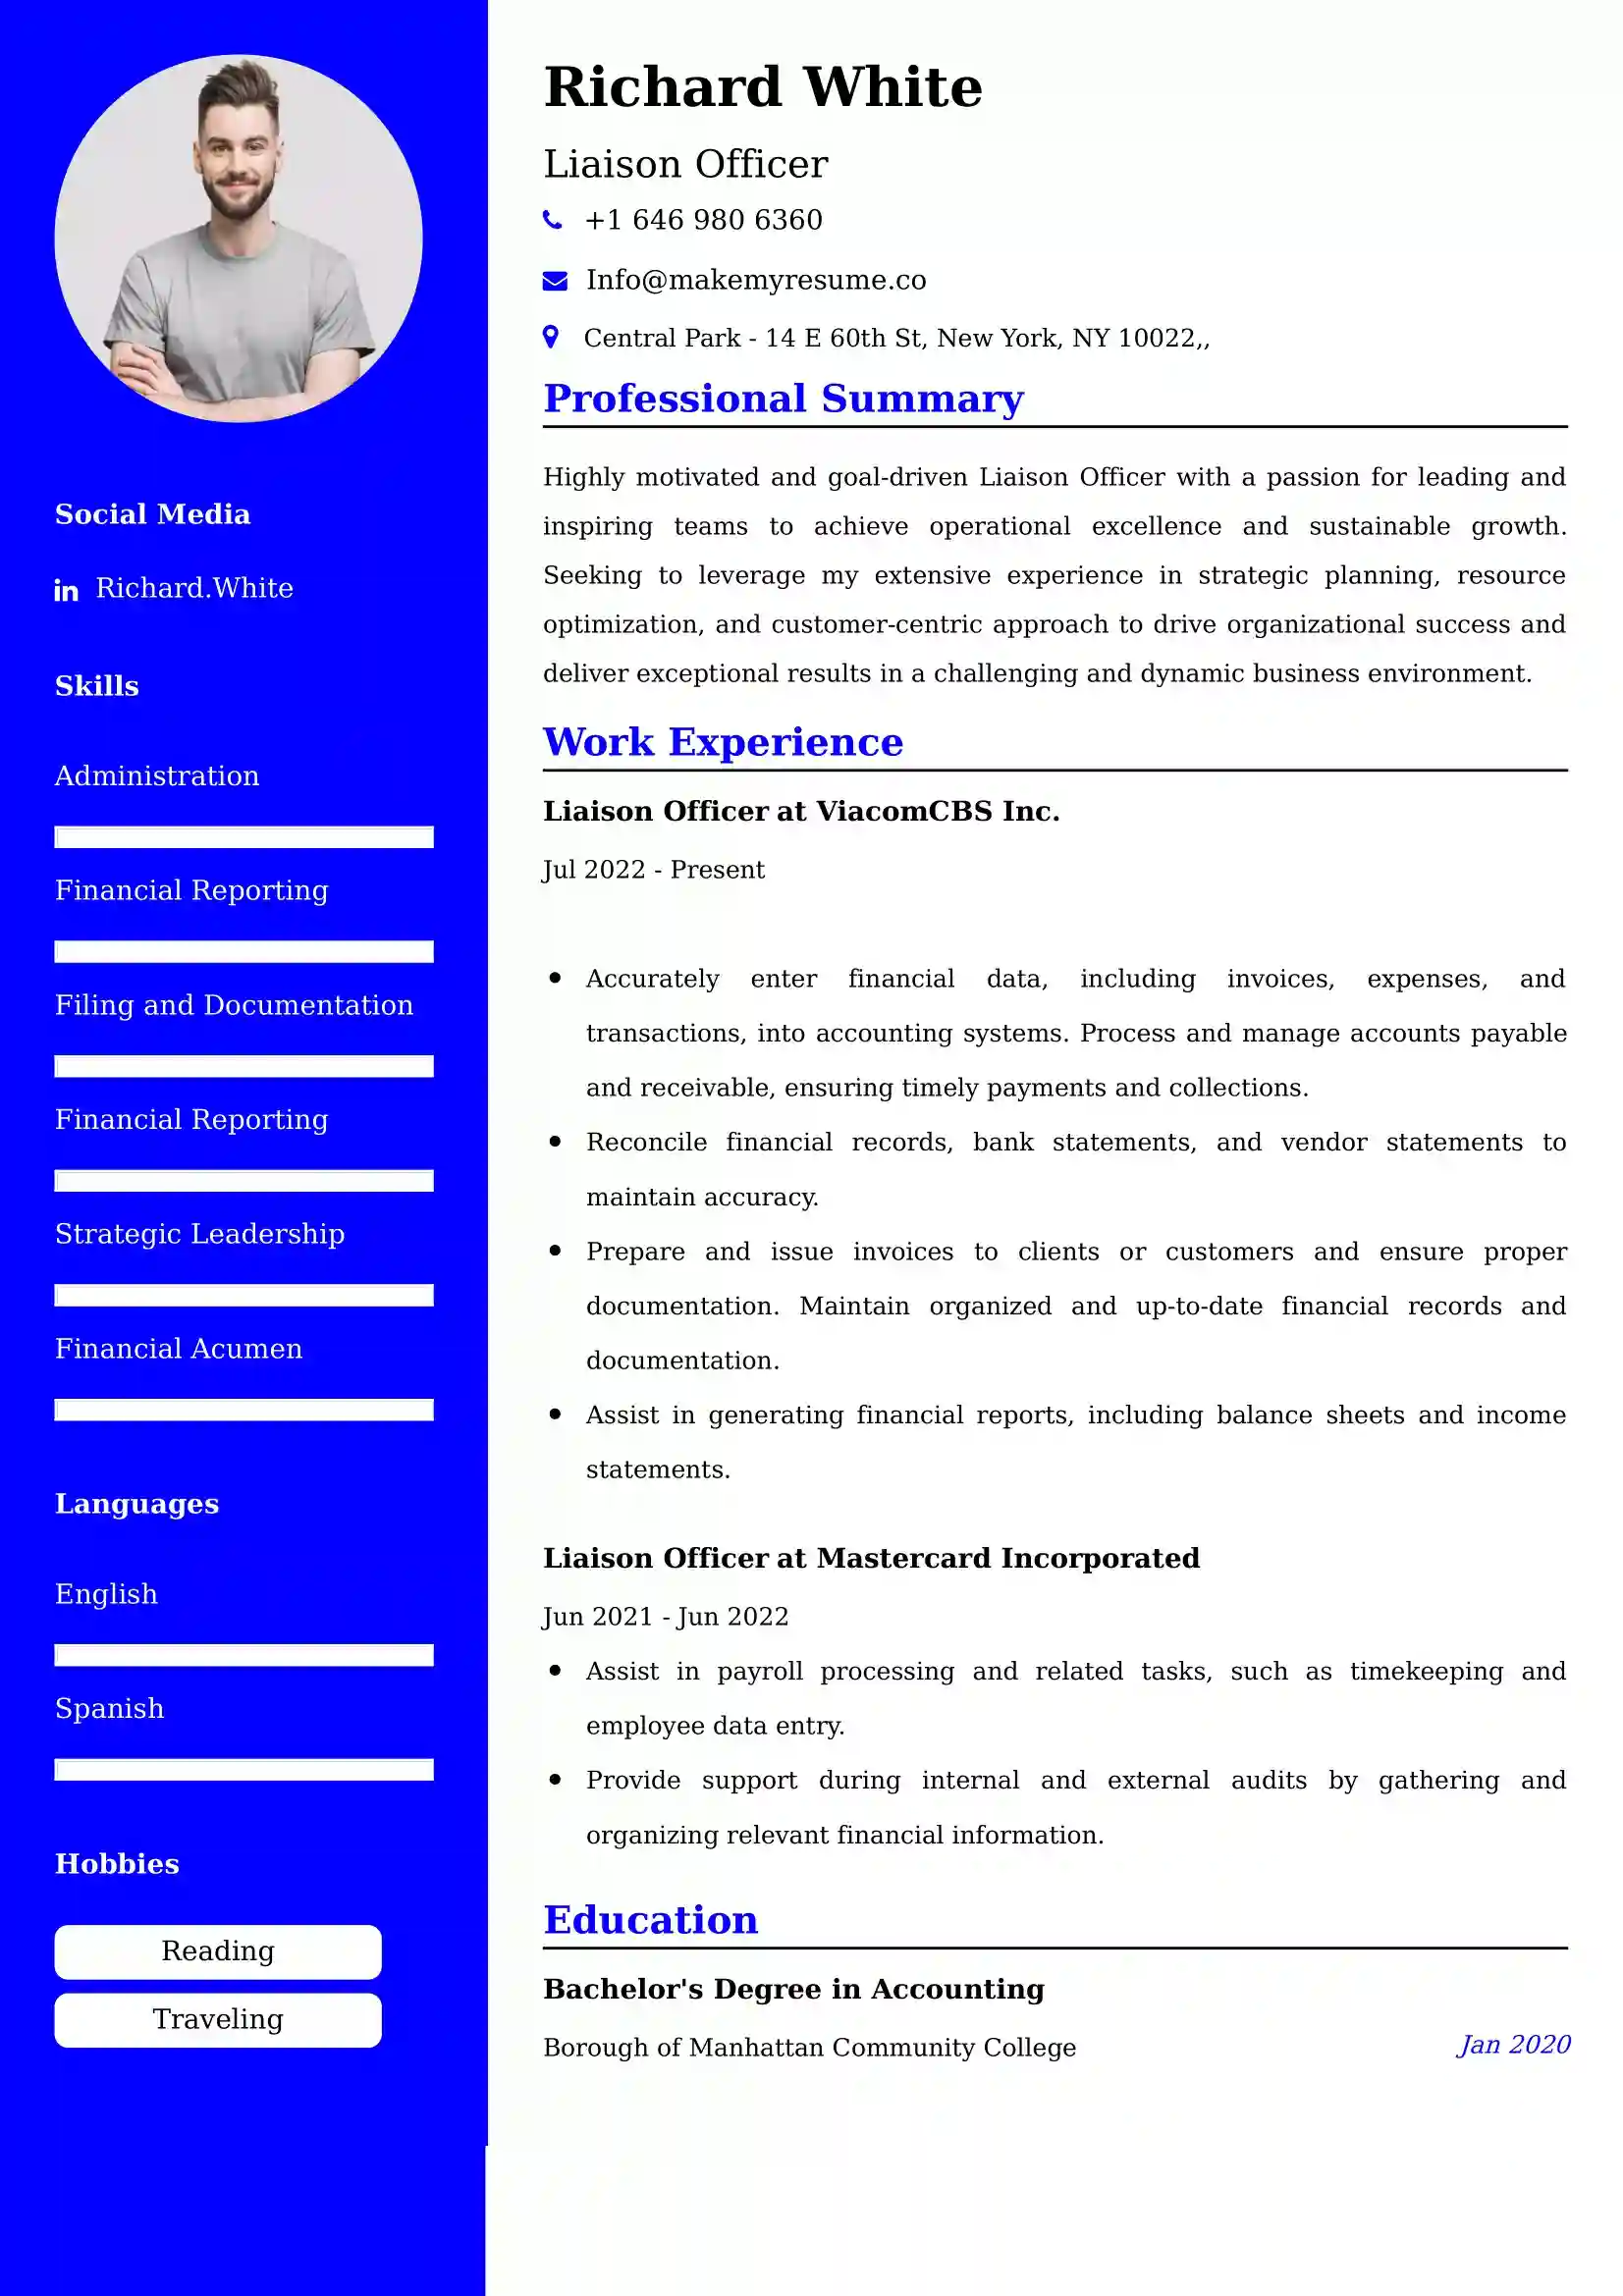 Liaison Officer Resume Examples - Brazilian Format, Latest Template